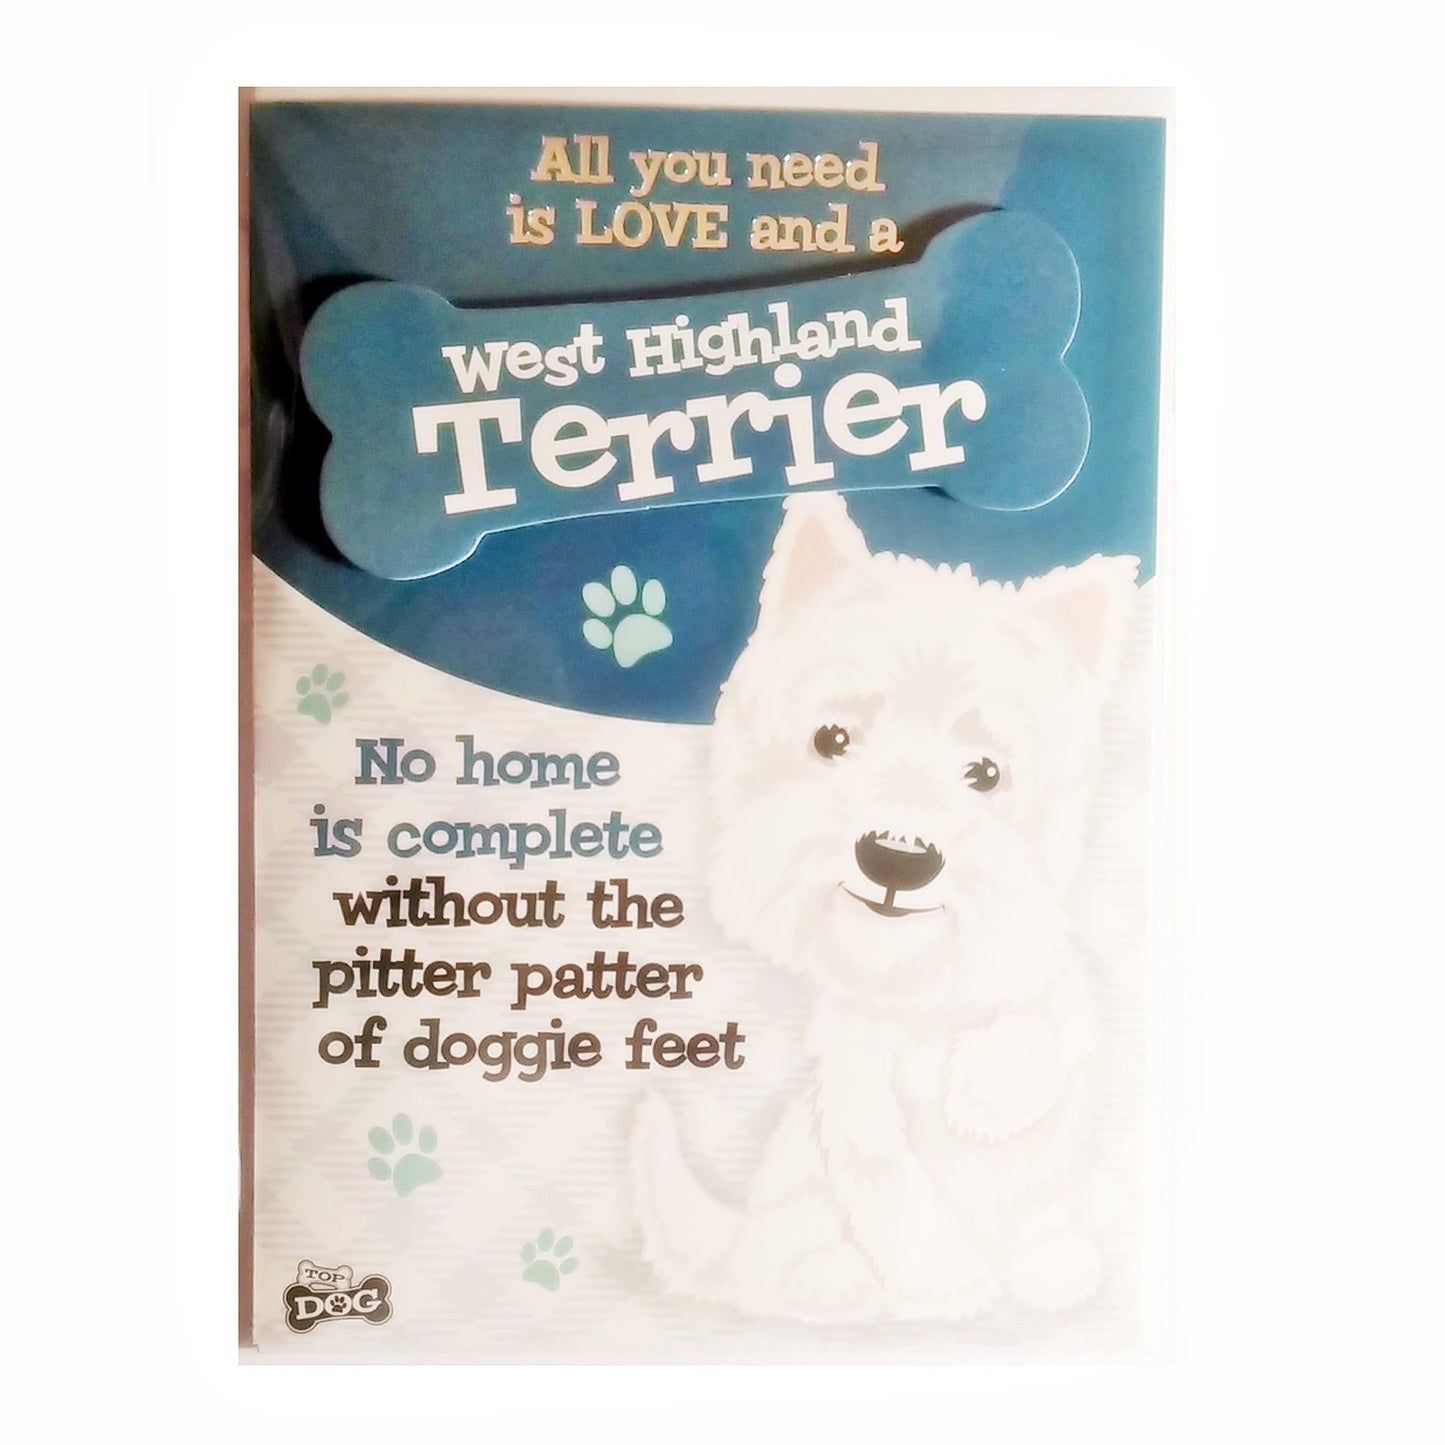 Wags & Whiskers Dog Greeting Card "West Highland Terrier" by Paper Island